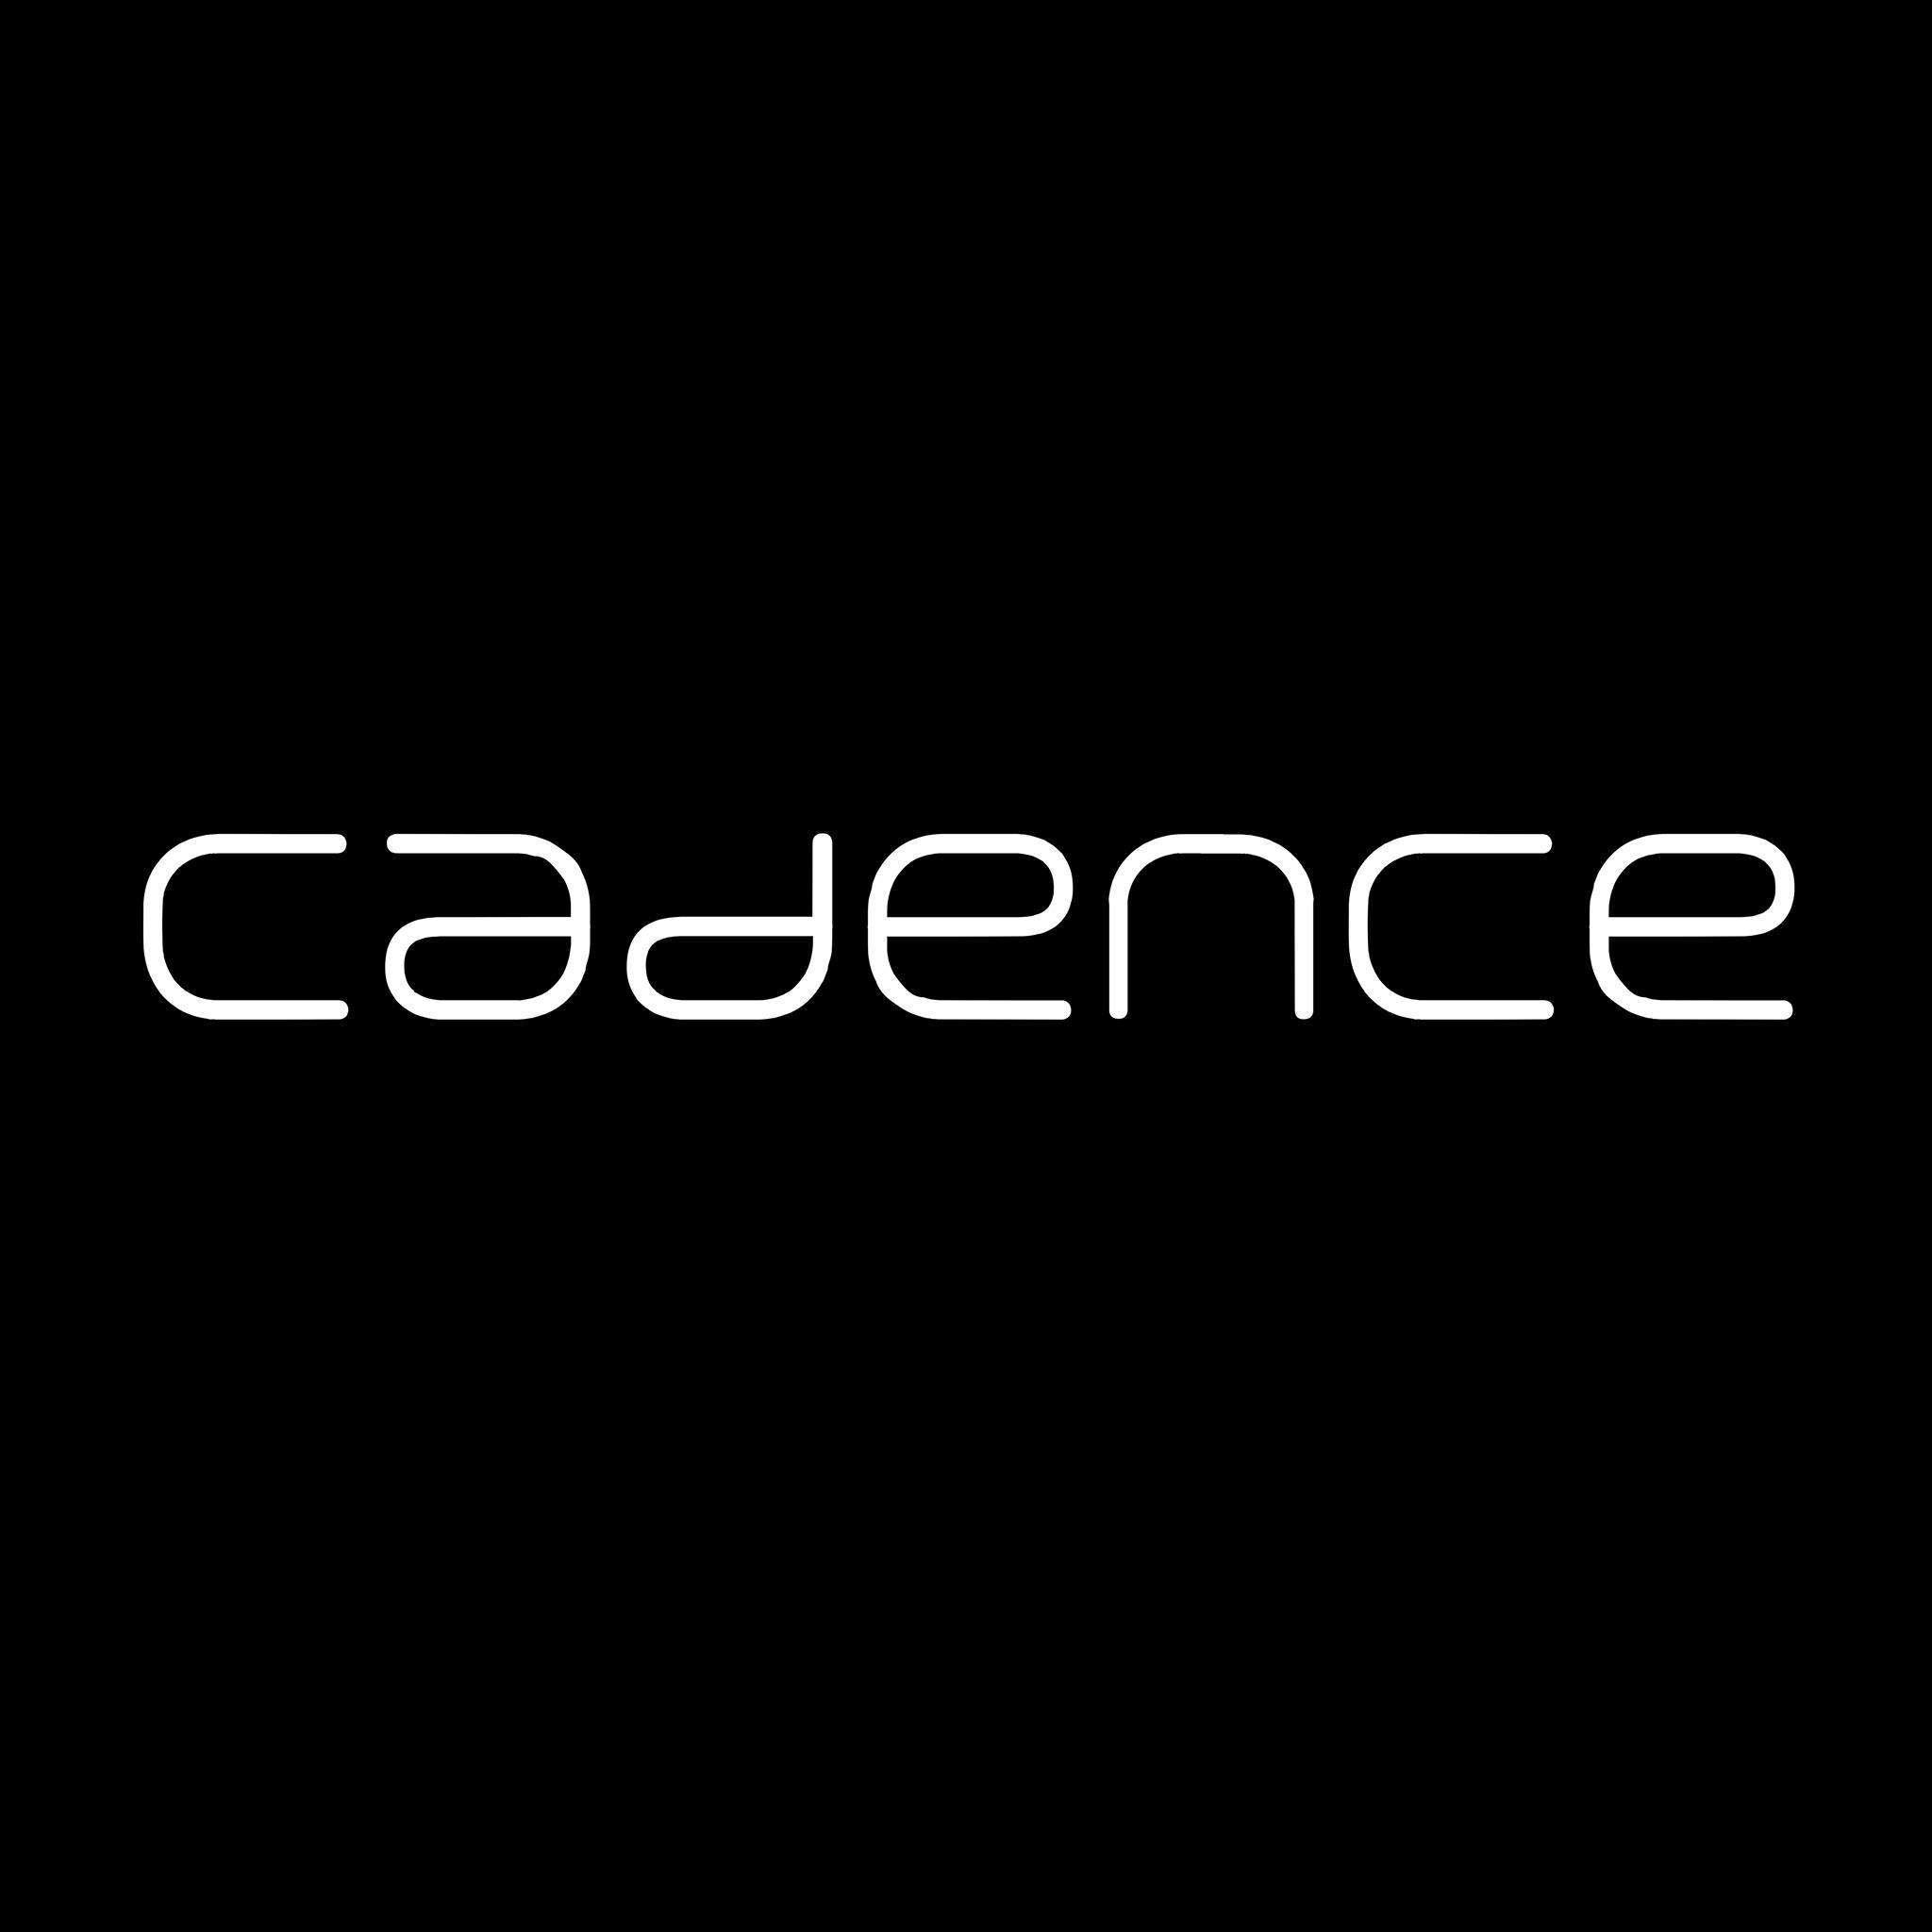 Cadence Architects|Legal Services|Professional Services